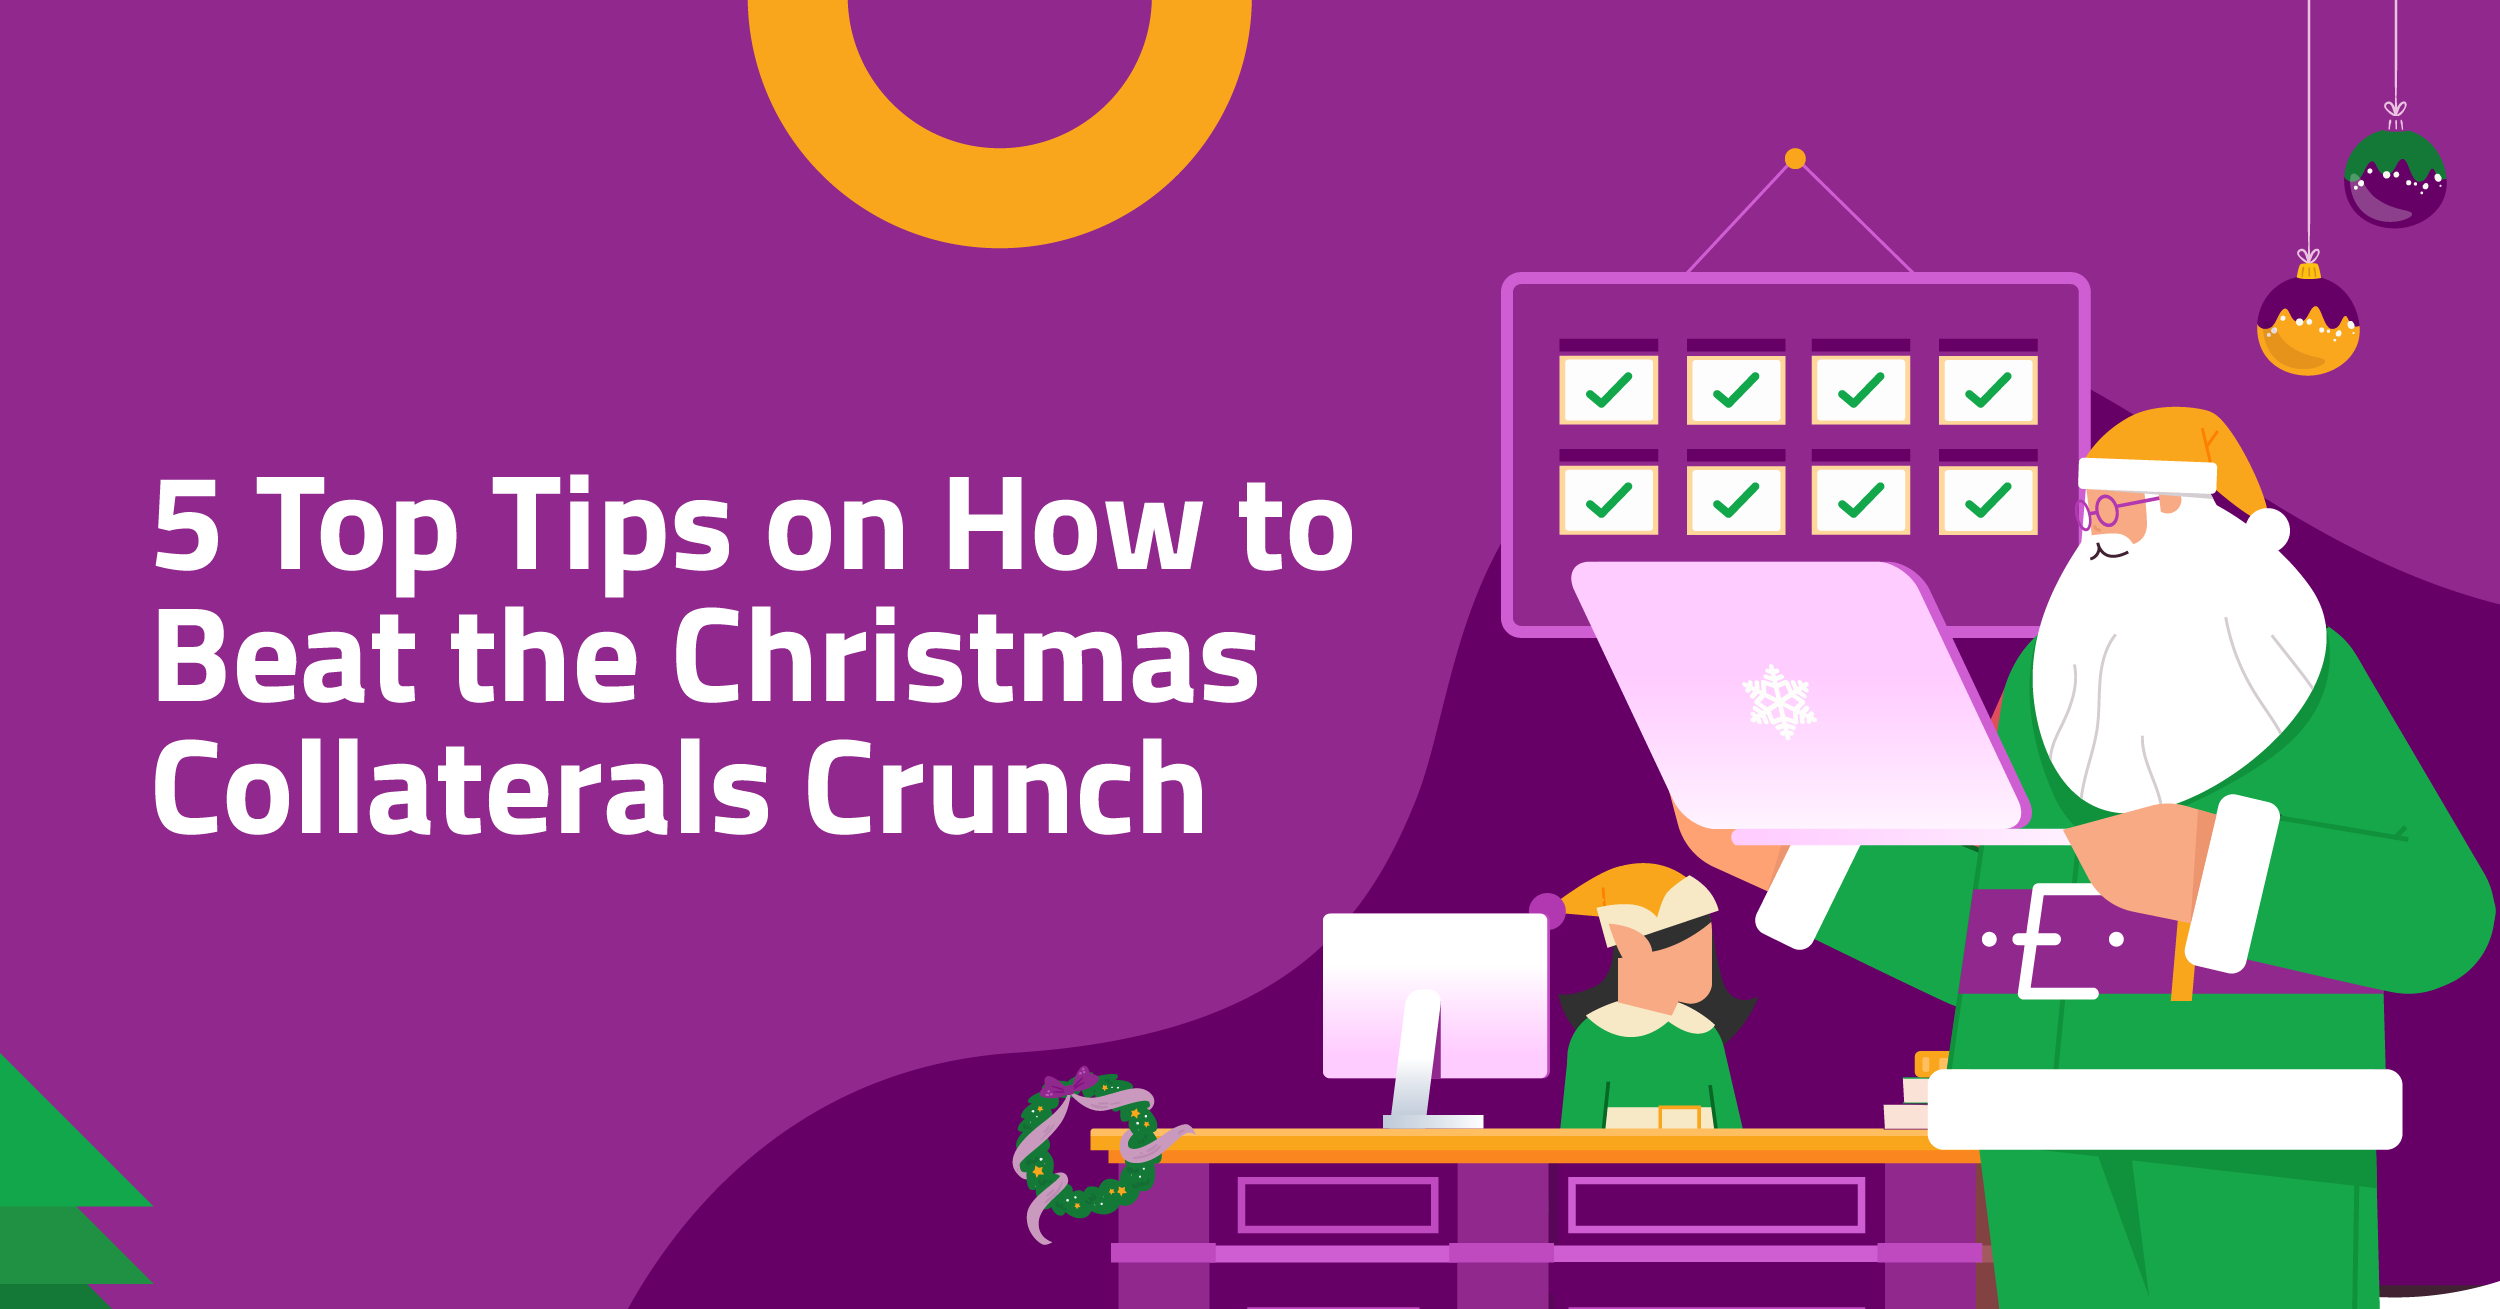 5 Top Tips on How to Beat the Christmas Collaterals Crunch